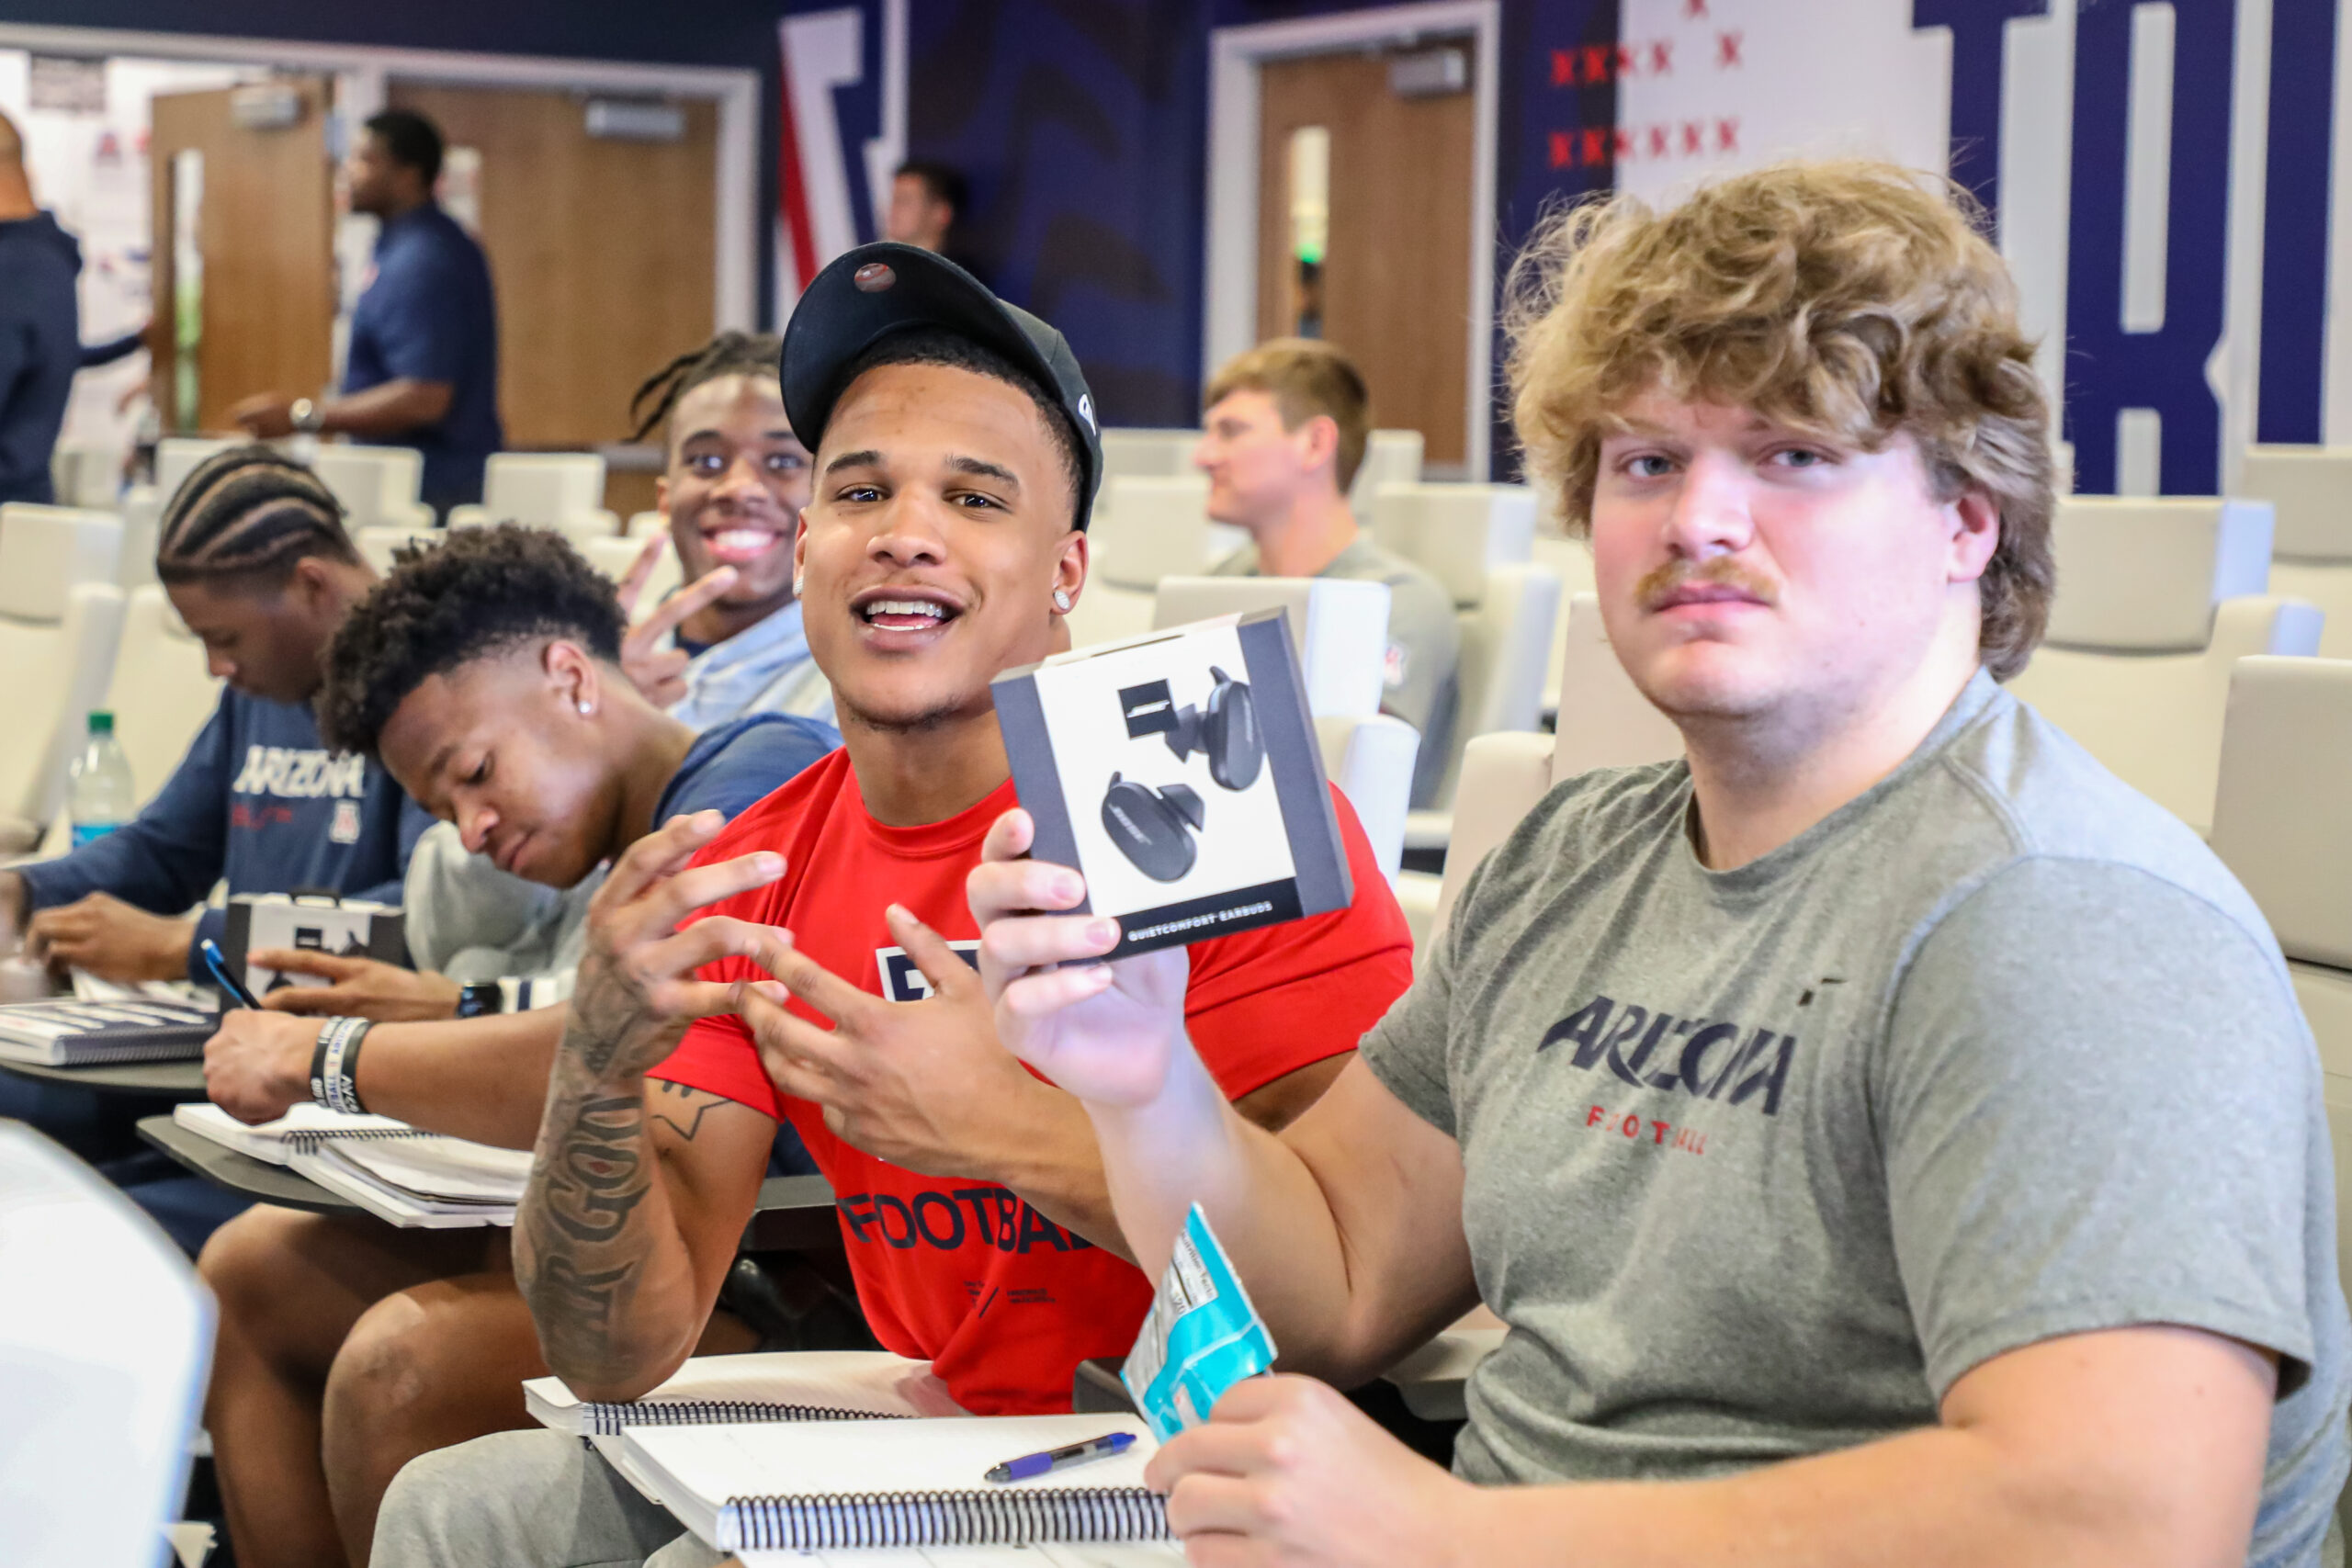 Arizona collective gifts Bose headphones to football roster through NIL partnership